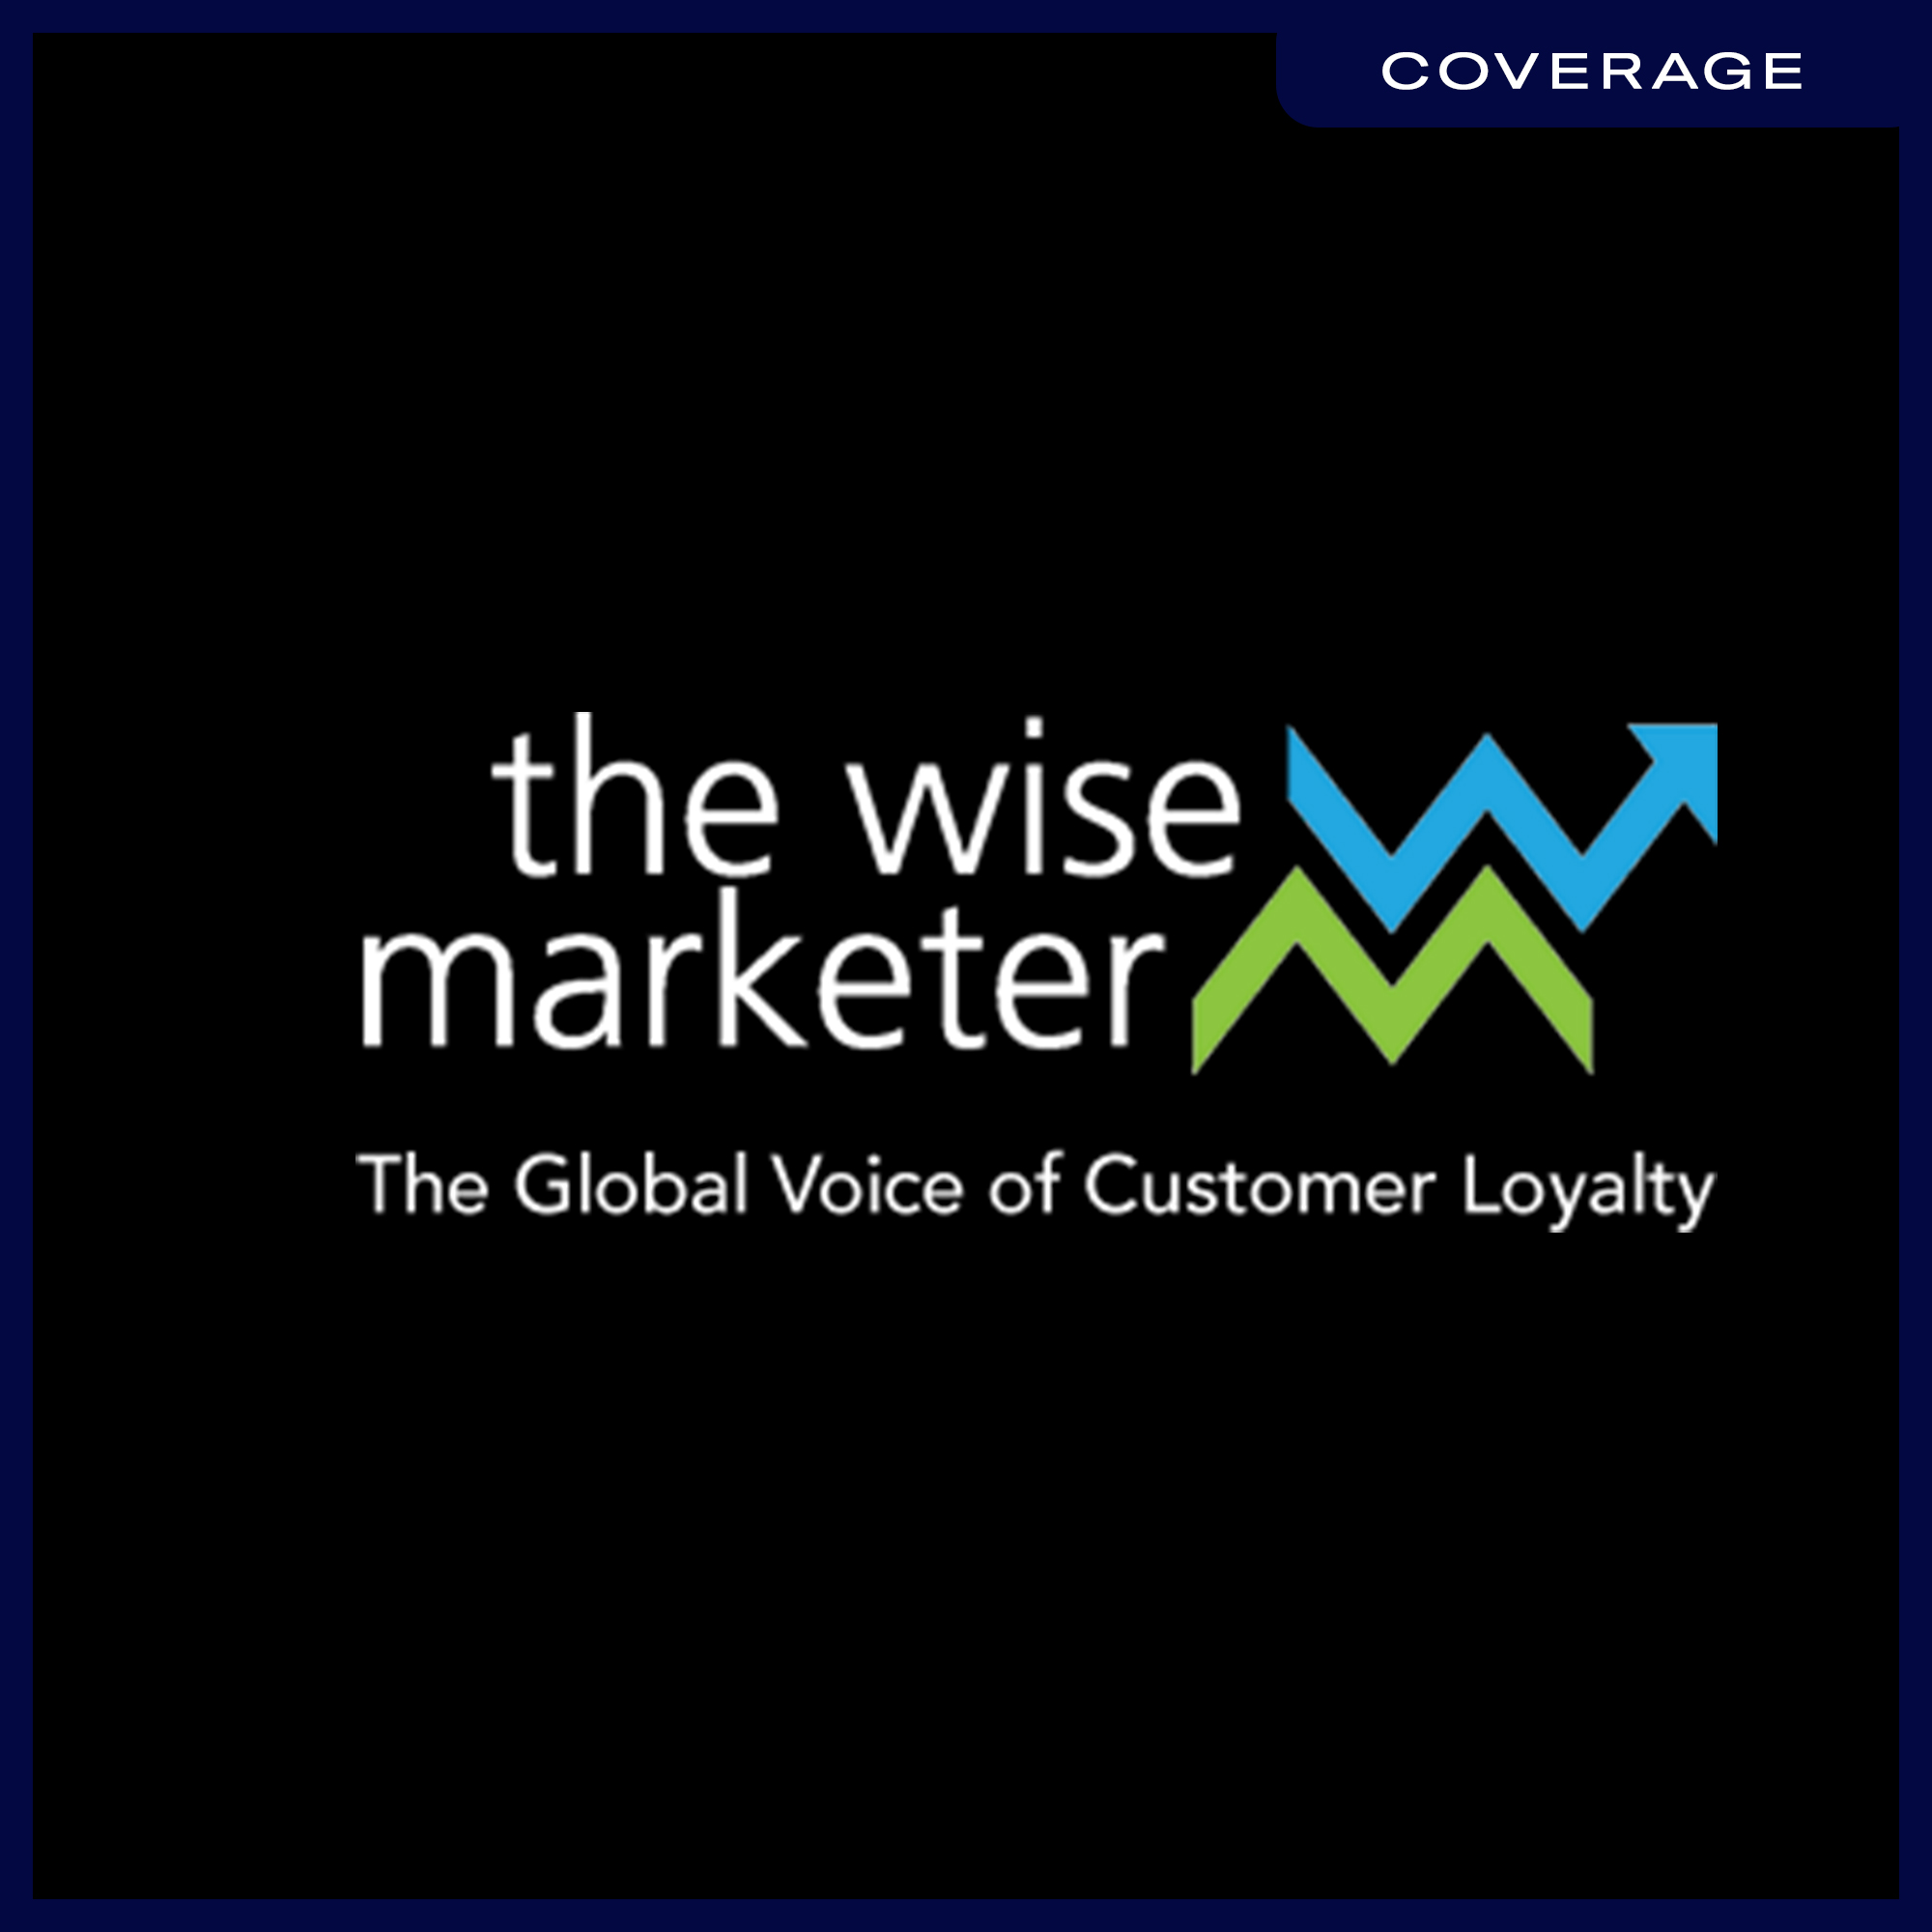 11_Coverage_TheWiseMarketer